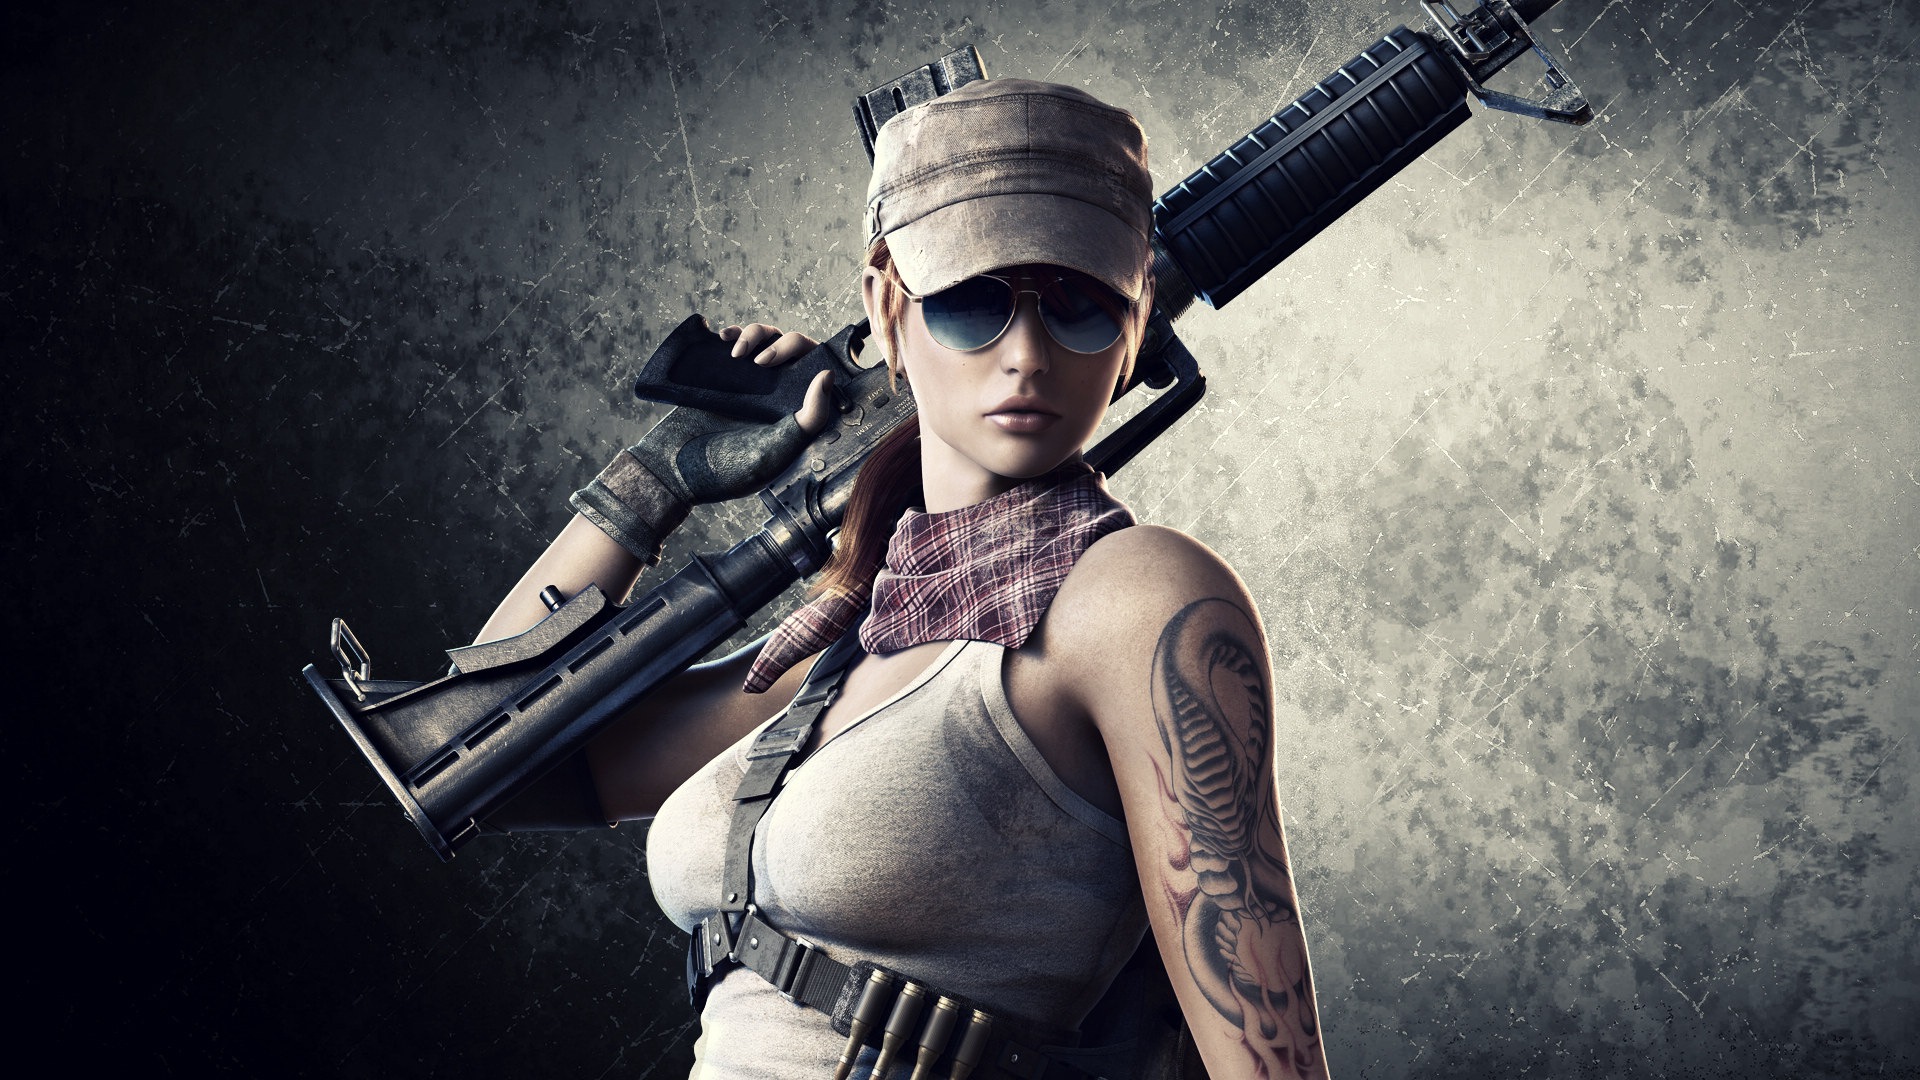 Point Blank HD game wallpapers #10 - 1920x1080